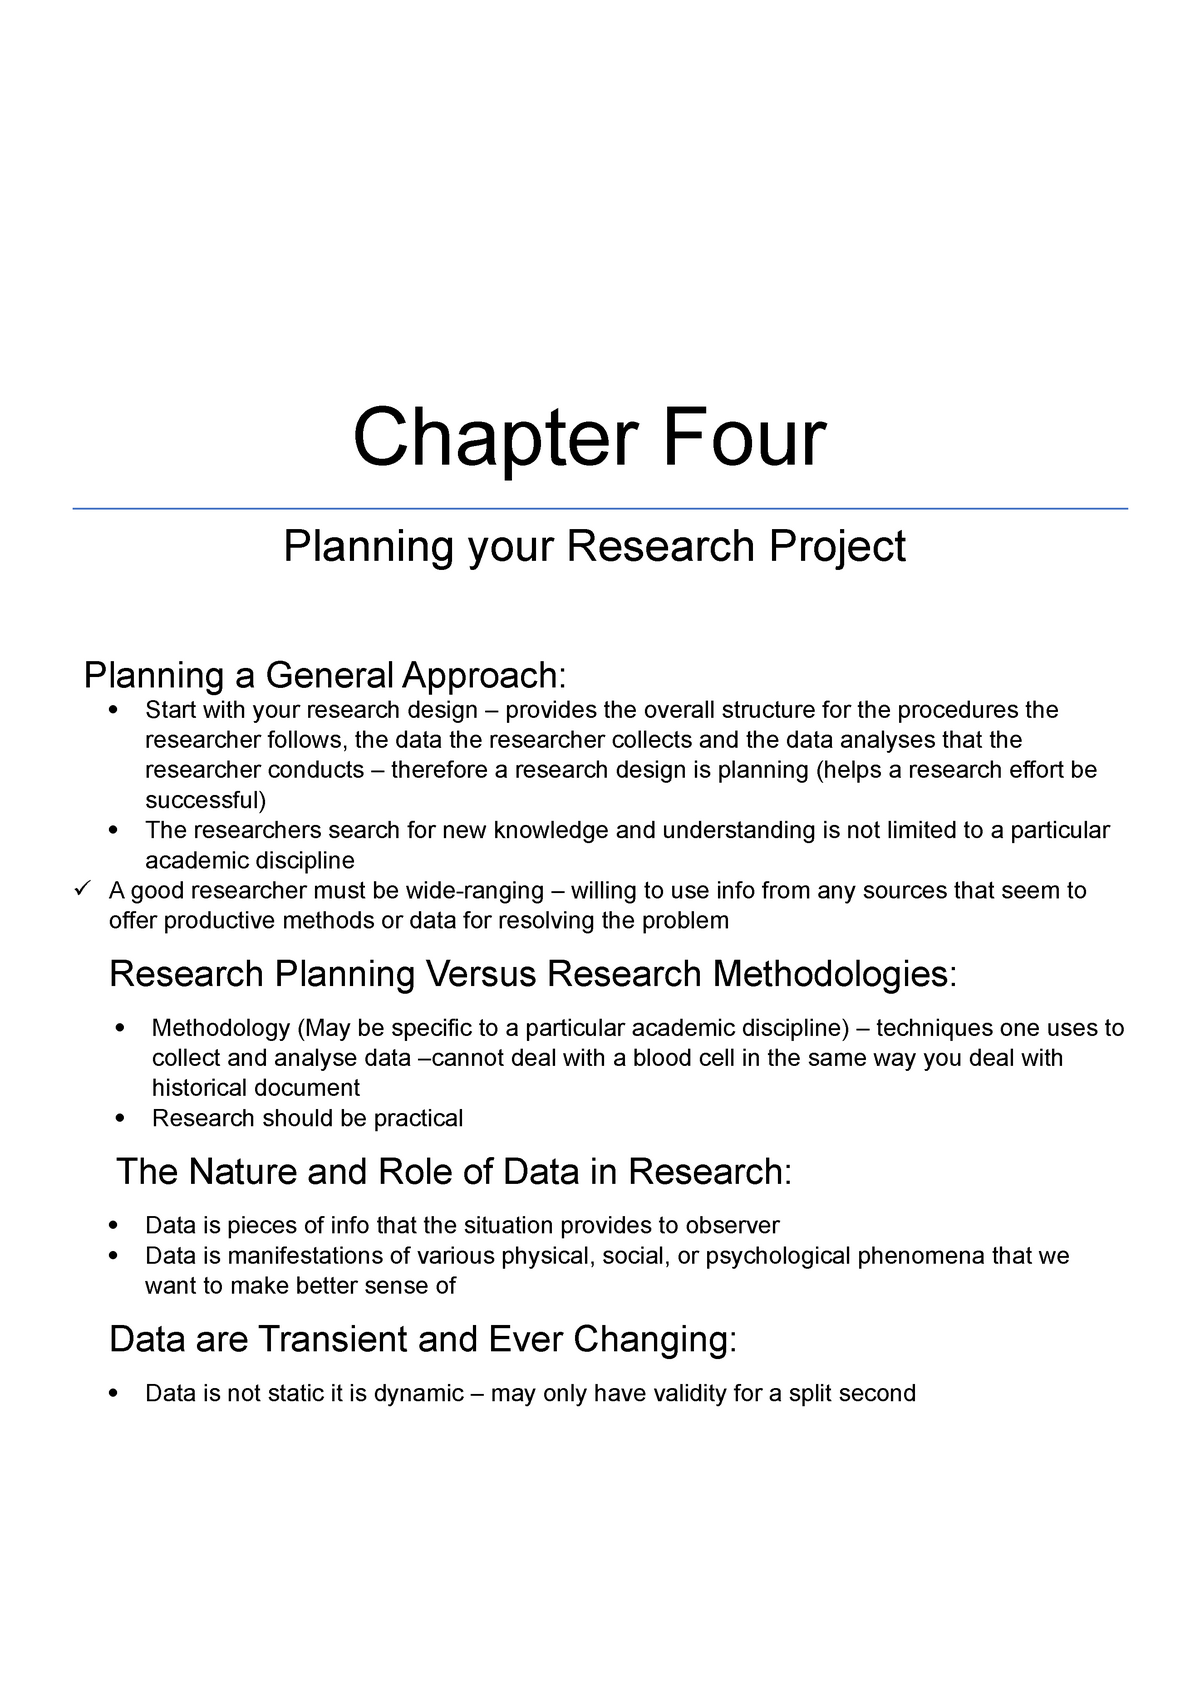 how to write chapter 4 of your research